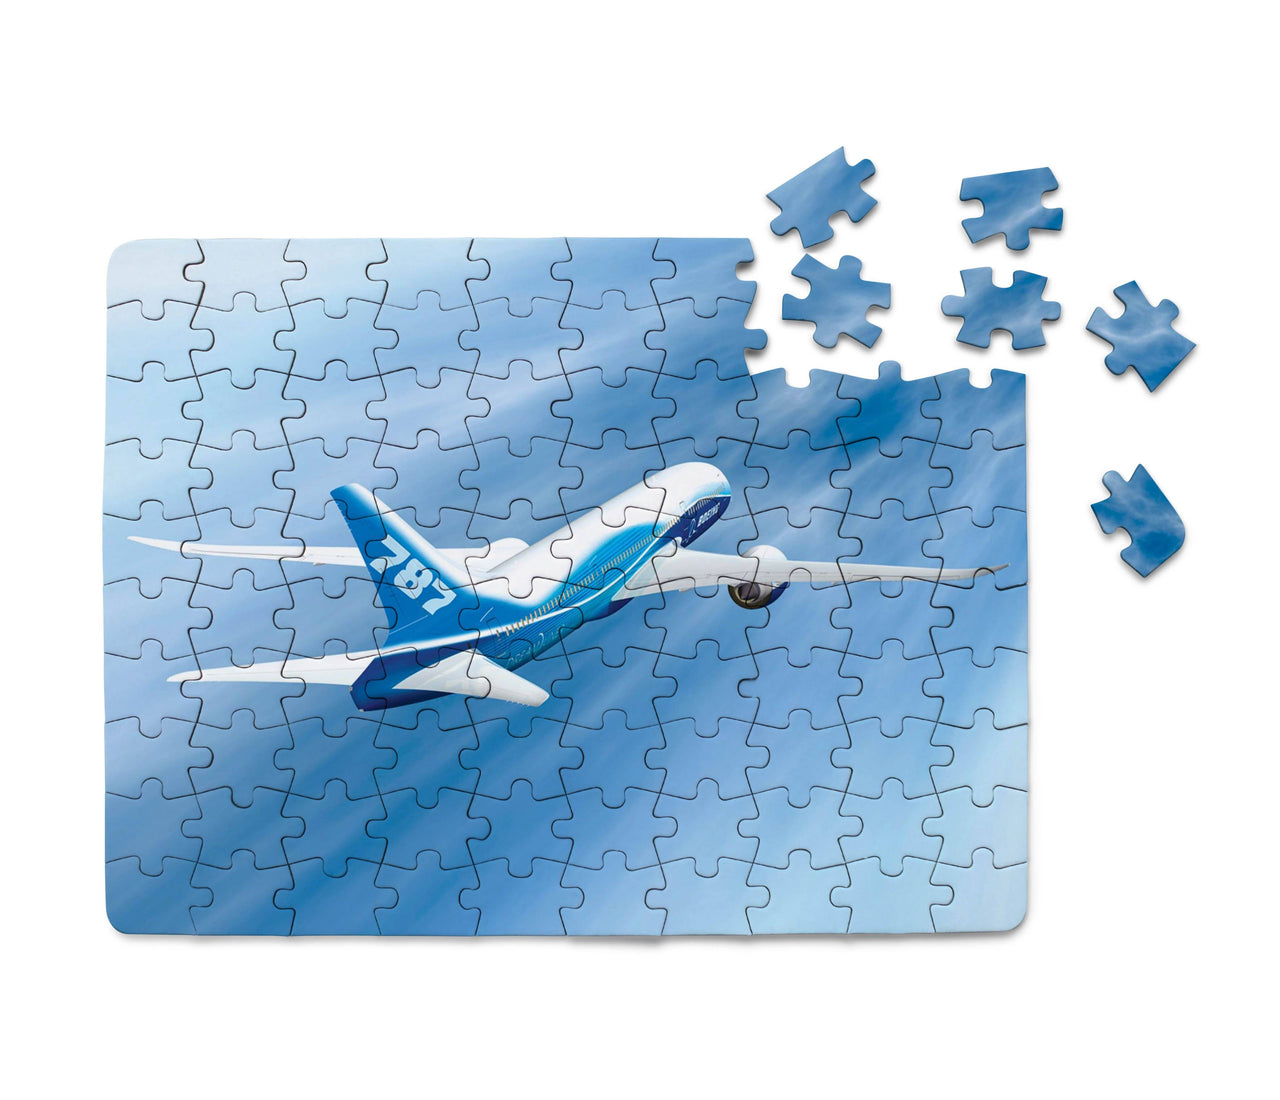 Beautiful Painting of Boeing 787 Dreamliner Printed Puzzles Aviation Shop 